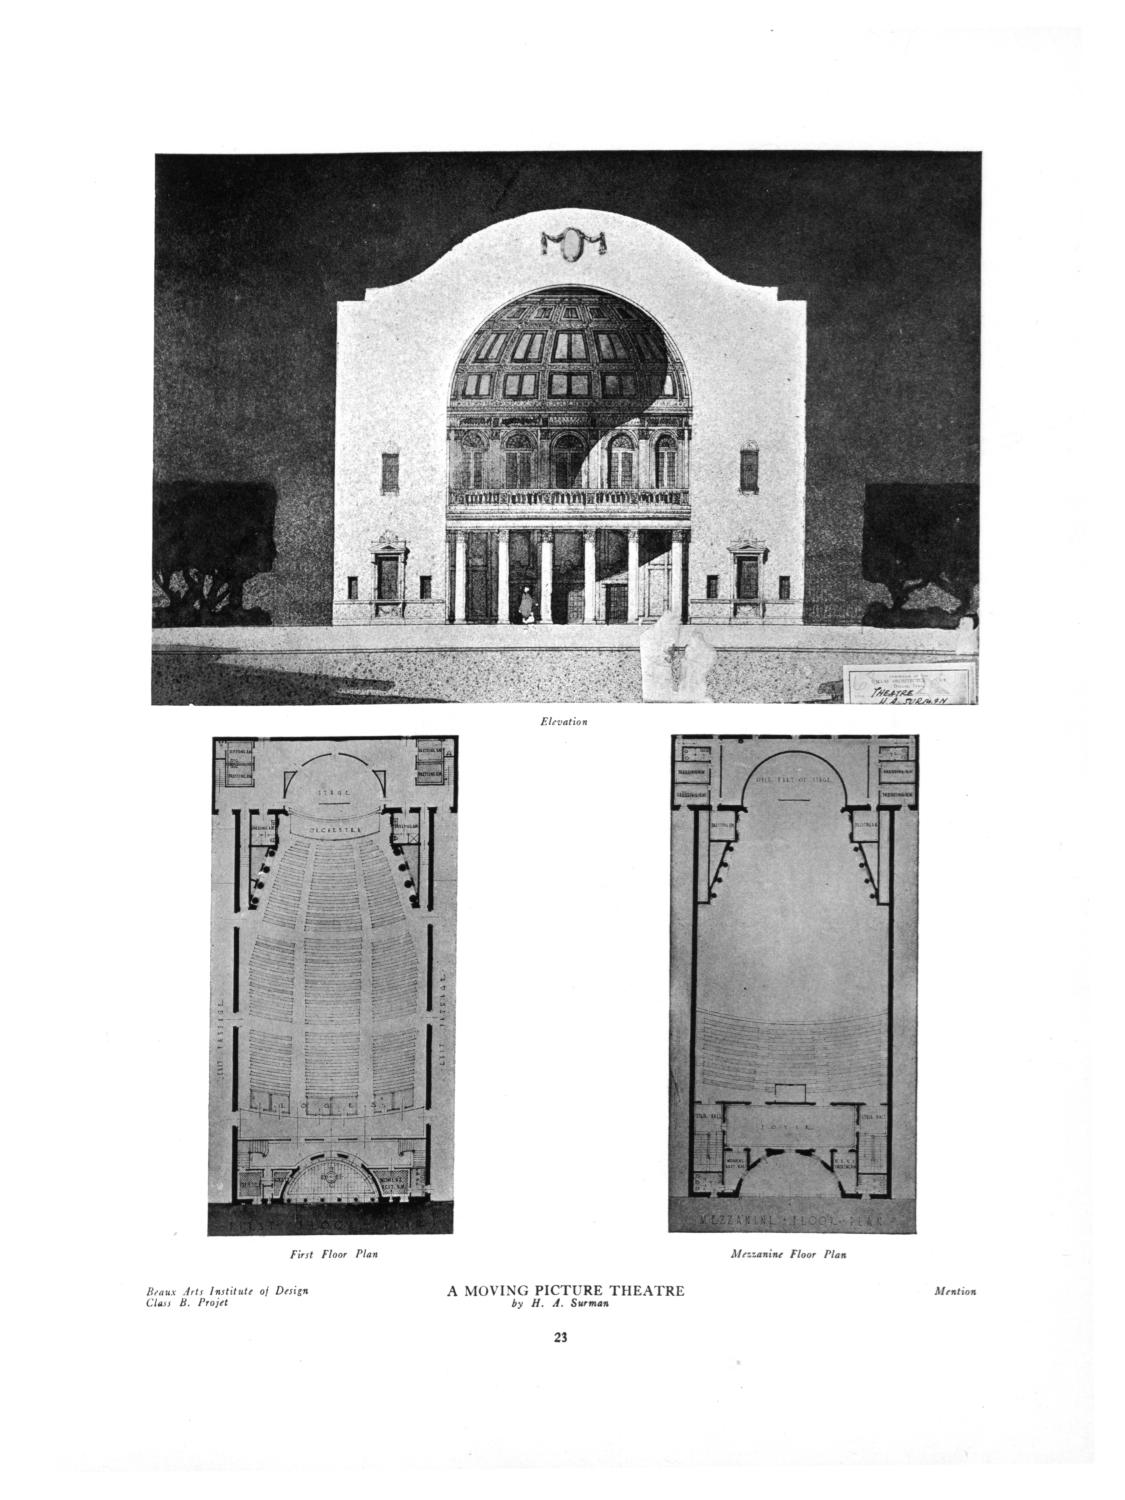 Year book of the Dallas Architectural Club and catalogue of its first annual exhibition : held at the Jefferson Hotel, Dallas, February eleventh to eighteenth, 1922
                                                
                                                    23
                                                